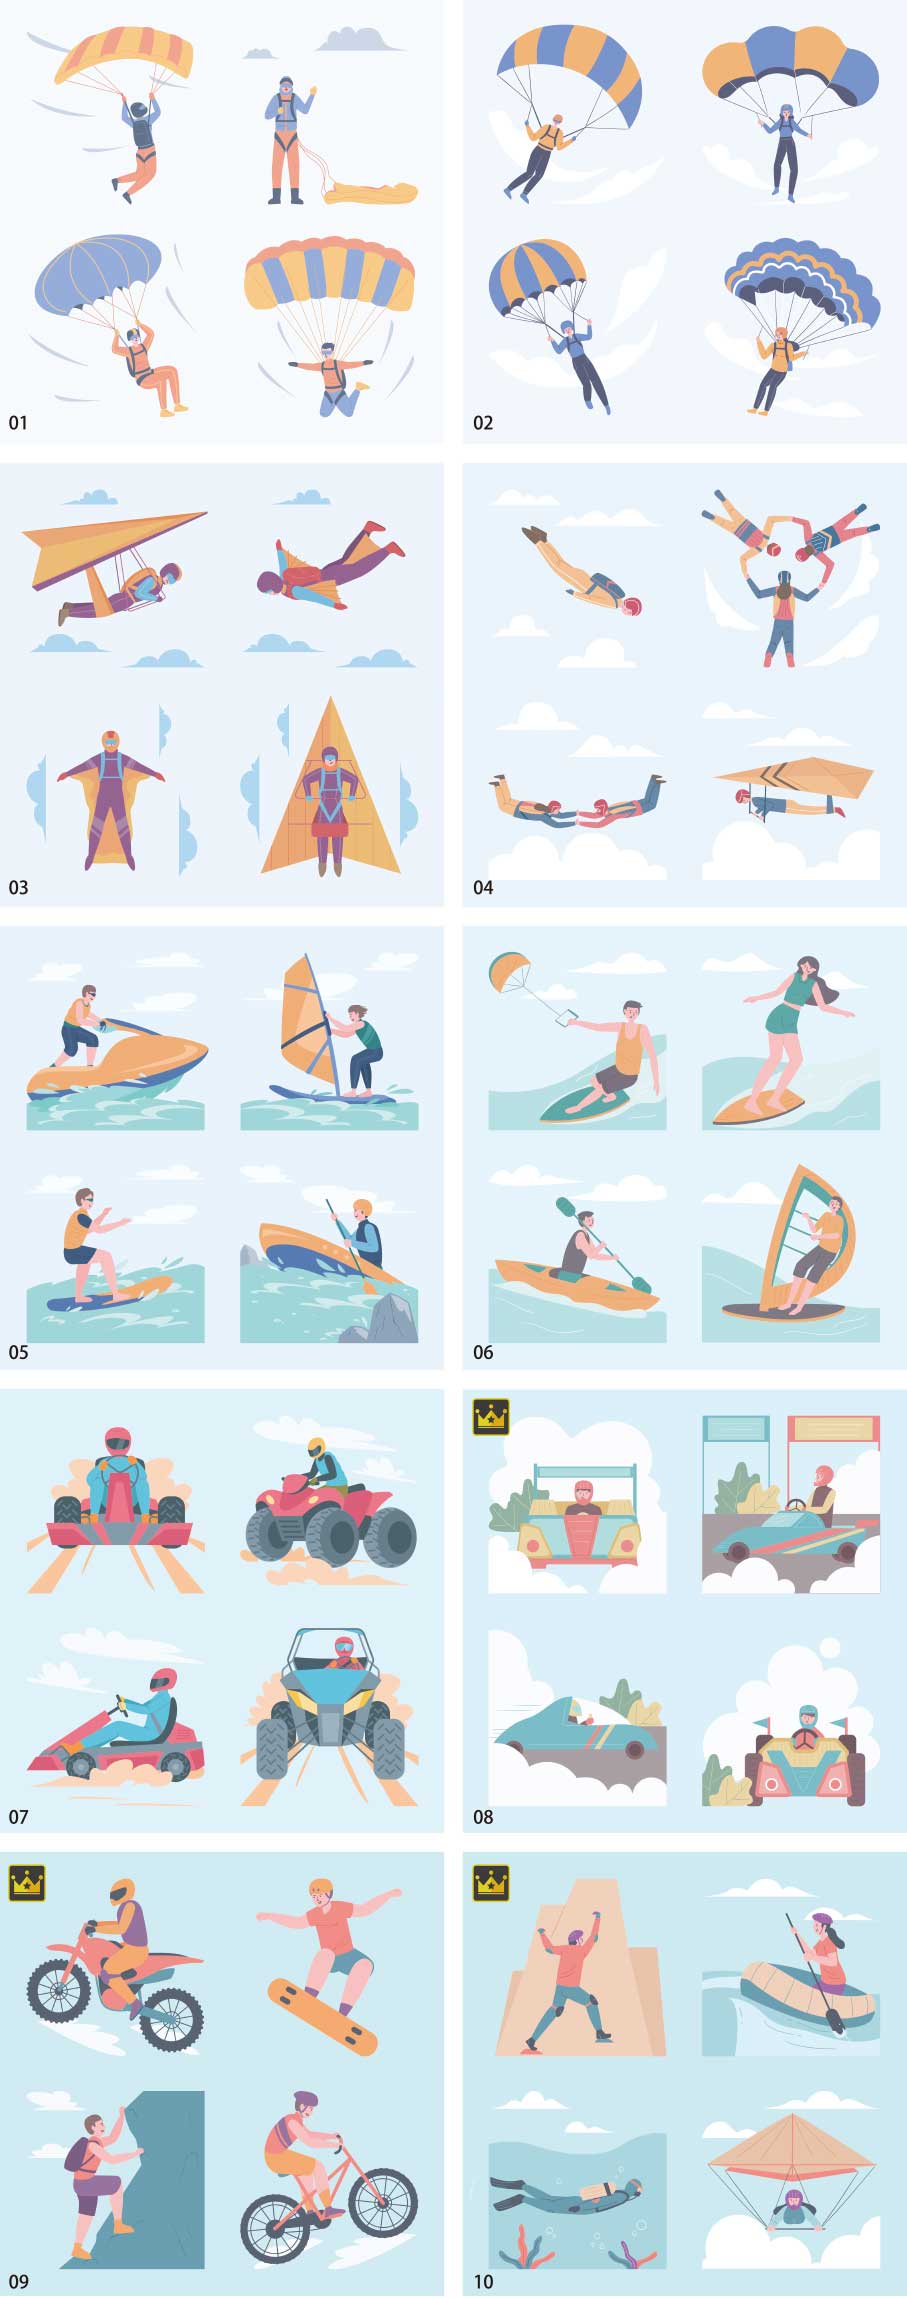 Extreme sports illustration collection vol.2